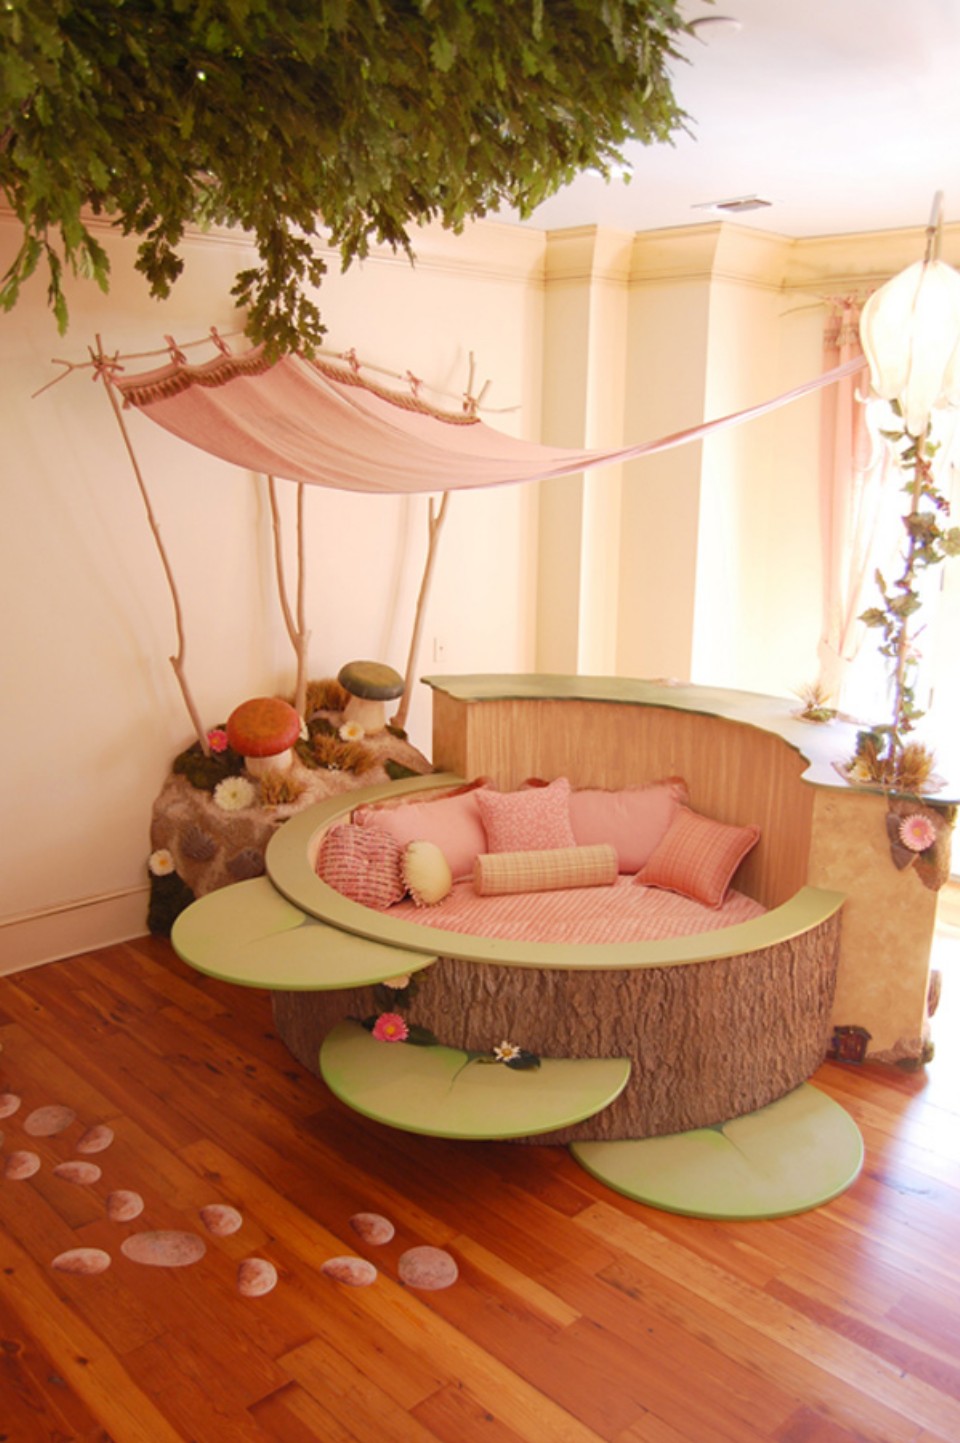 Fairy Land Room Cute Fairy Land Themed Kids Room Furniture Decorating Ideas With Pretty Round Wooden Bed Design And Cute Purple Chic Canopy Bed Also Beauteous Pendant Light Idea And Rustic Striped Wooden Flooring Furniture Composing The Special Type Of Kids Room Furniture